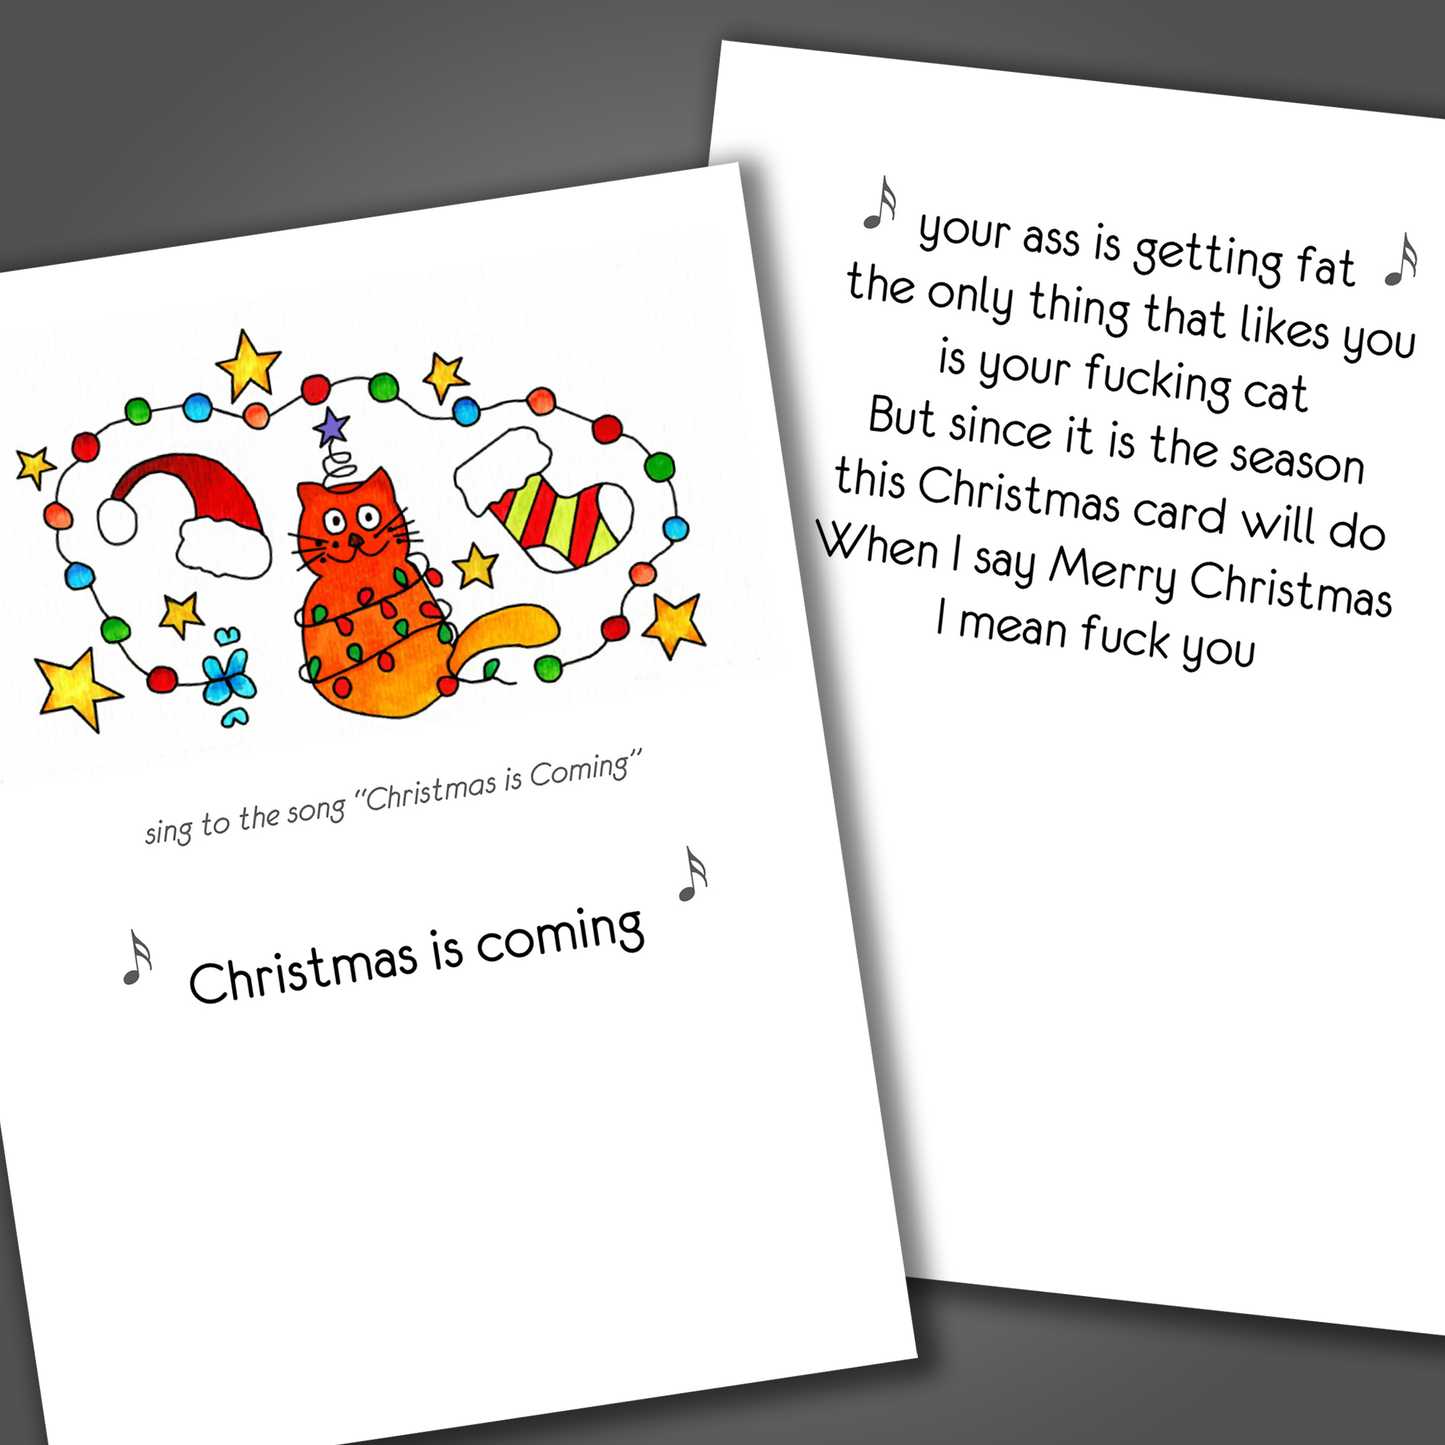 Merry Christmas card with a cat and the lyrics Christmas is coming written on front of card. Inside the card is a joke that says your ass is getting fuck and when I say Merry Christmas I mean fuck you.